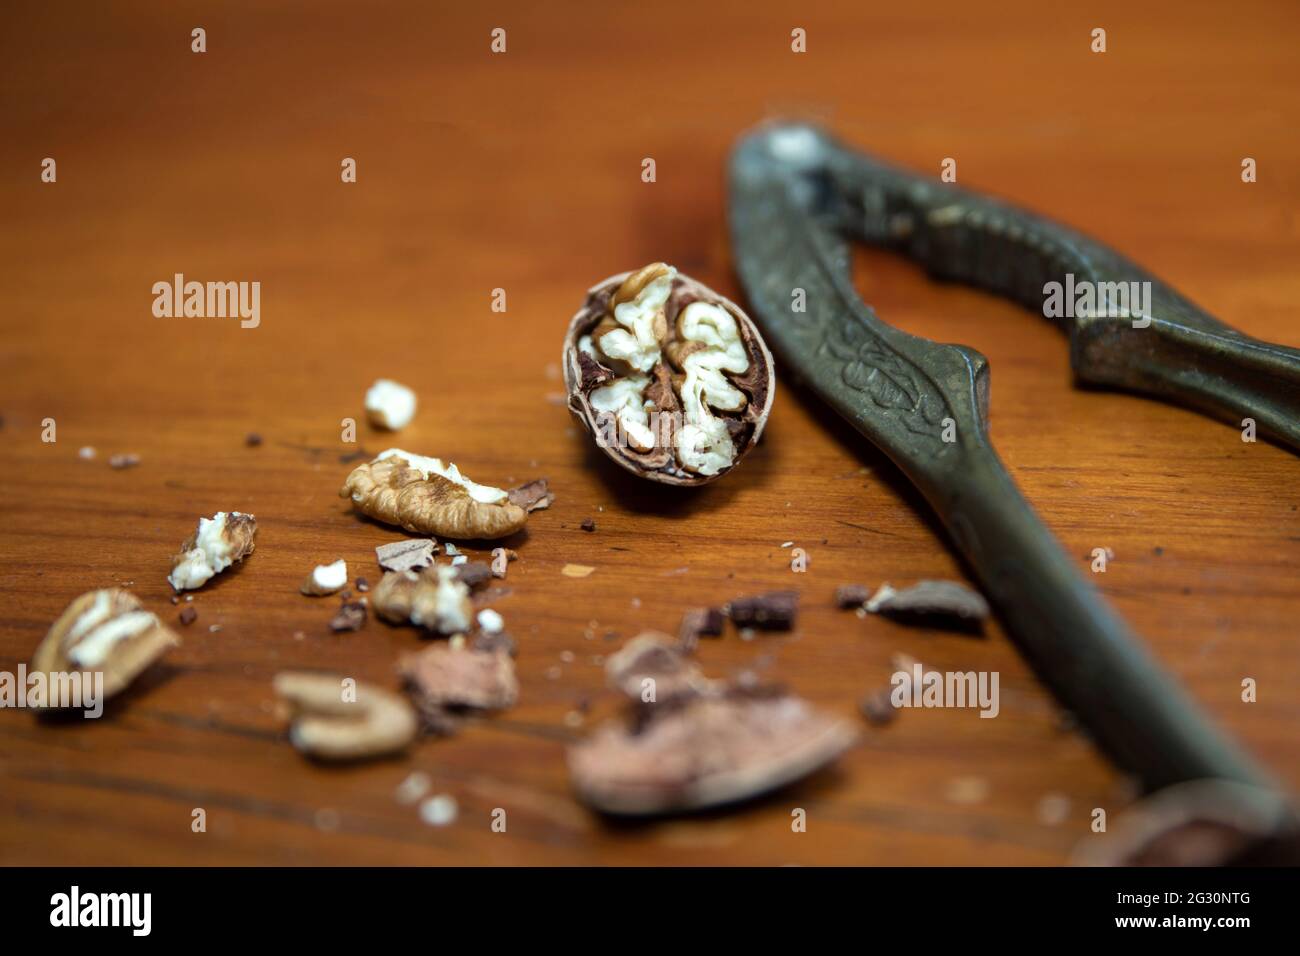 Vintage Nut Cracker with pecan nuts on a wood table Stock Photo